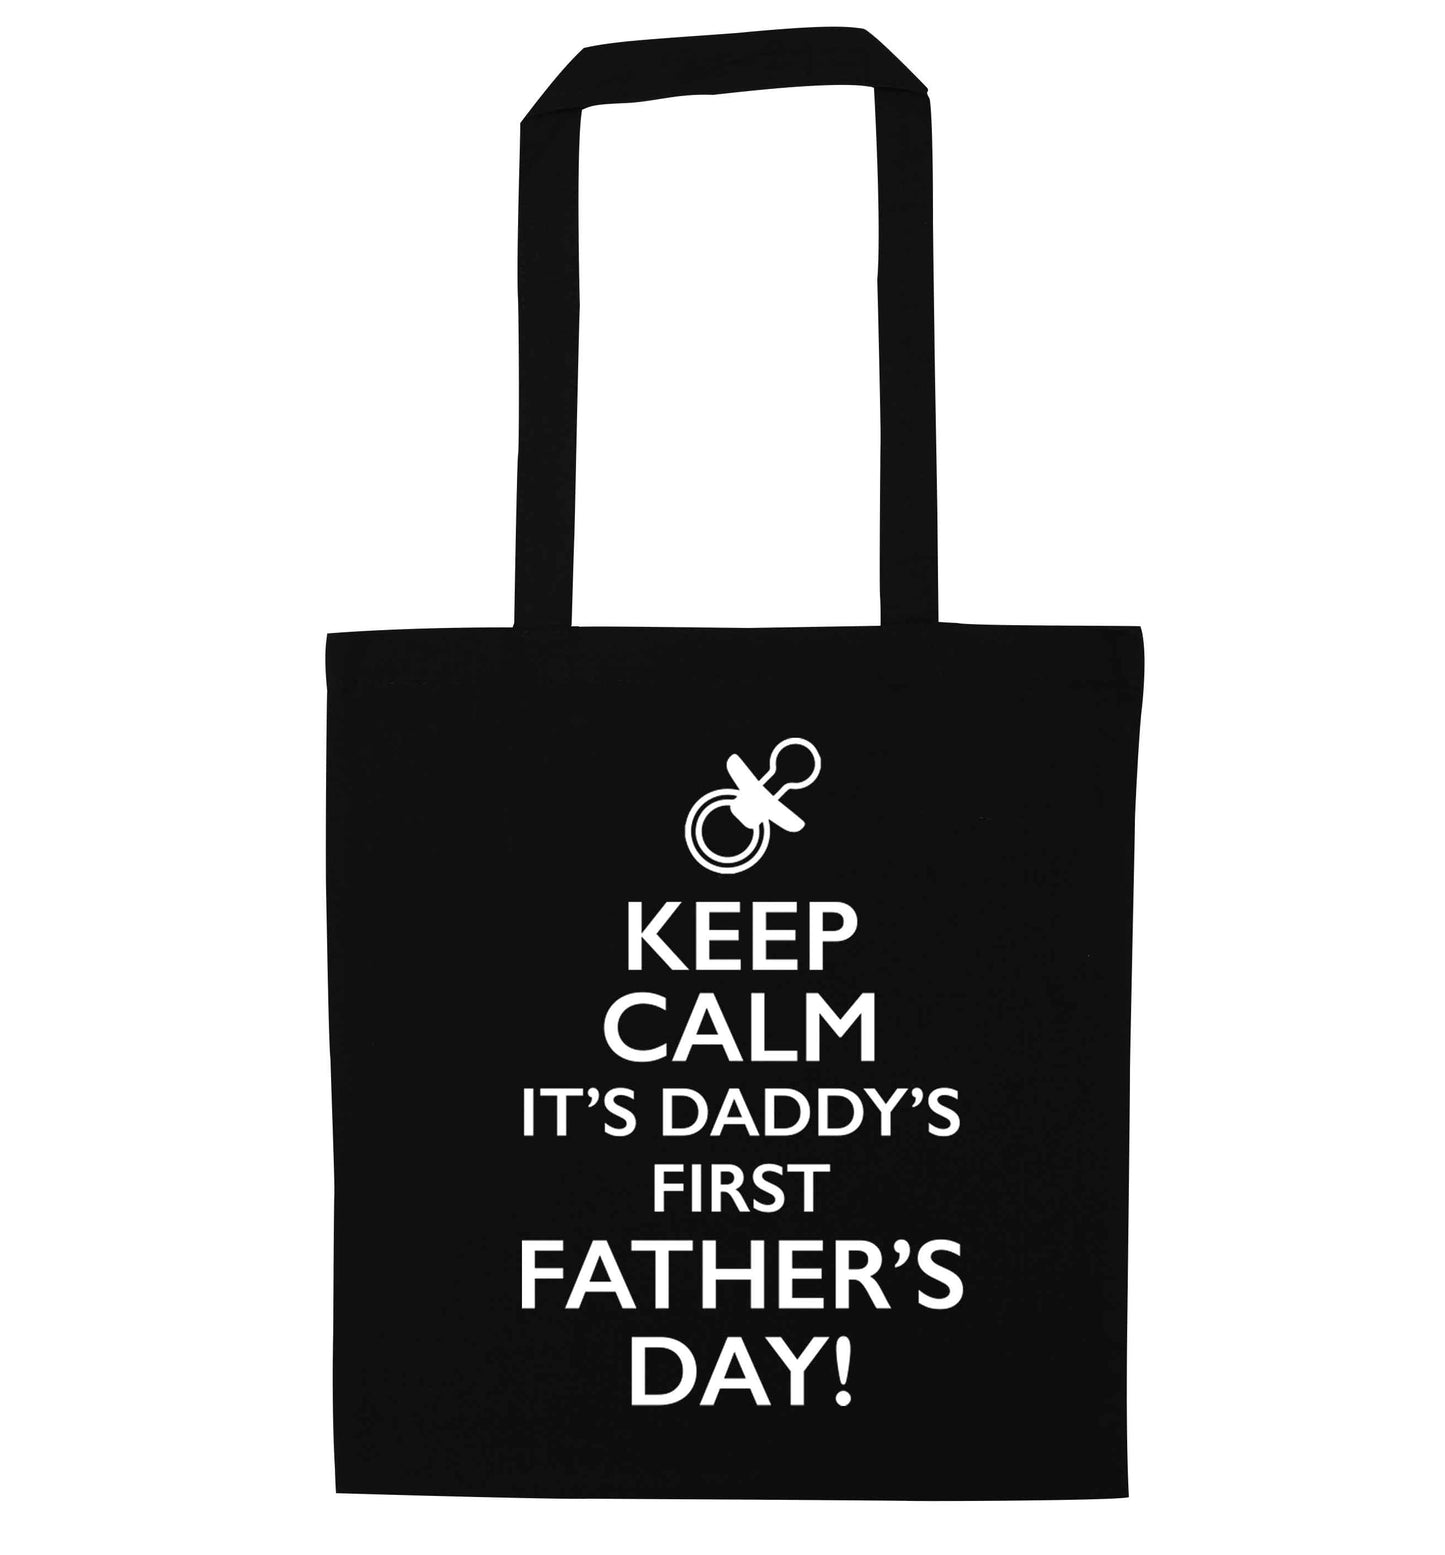 Keep calm it's daddys first father's day black tote bag